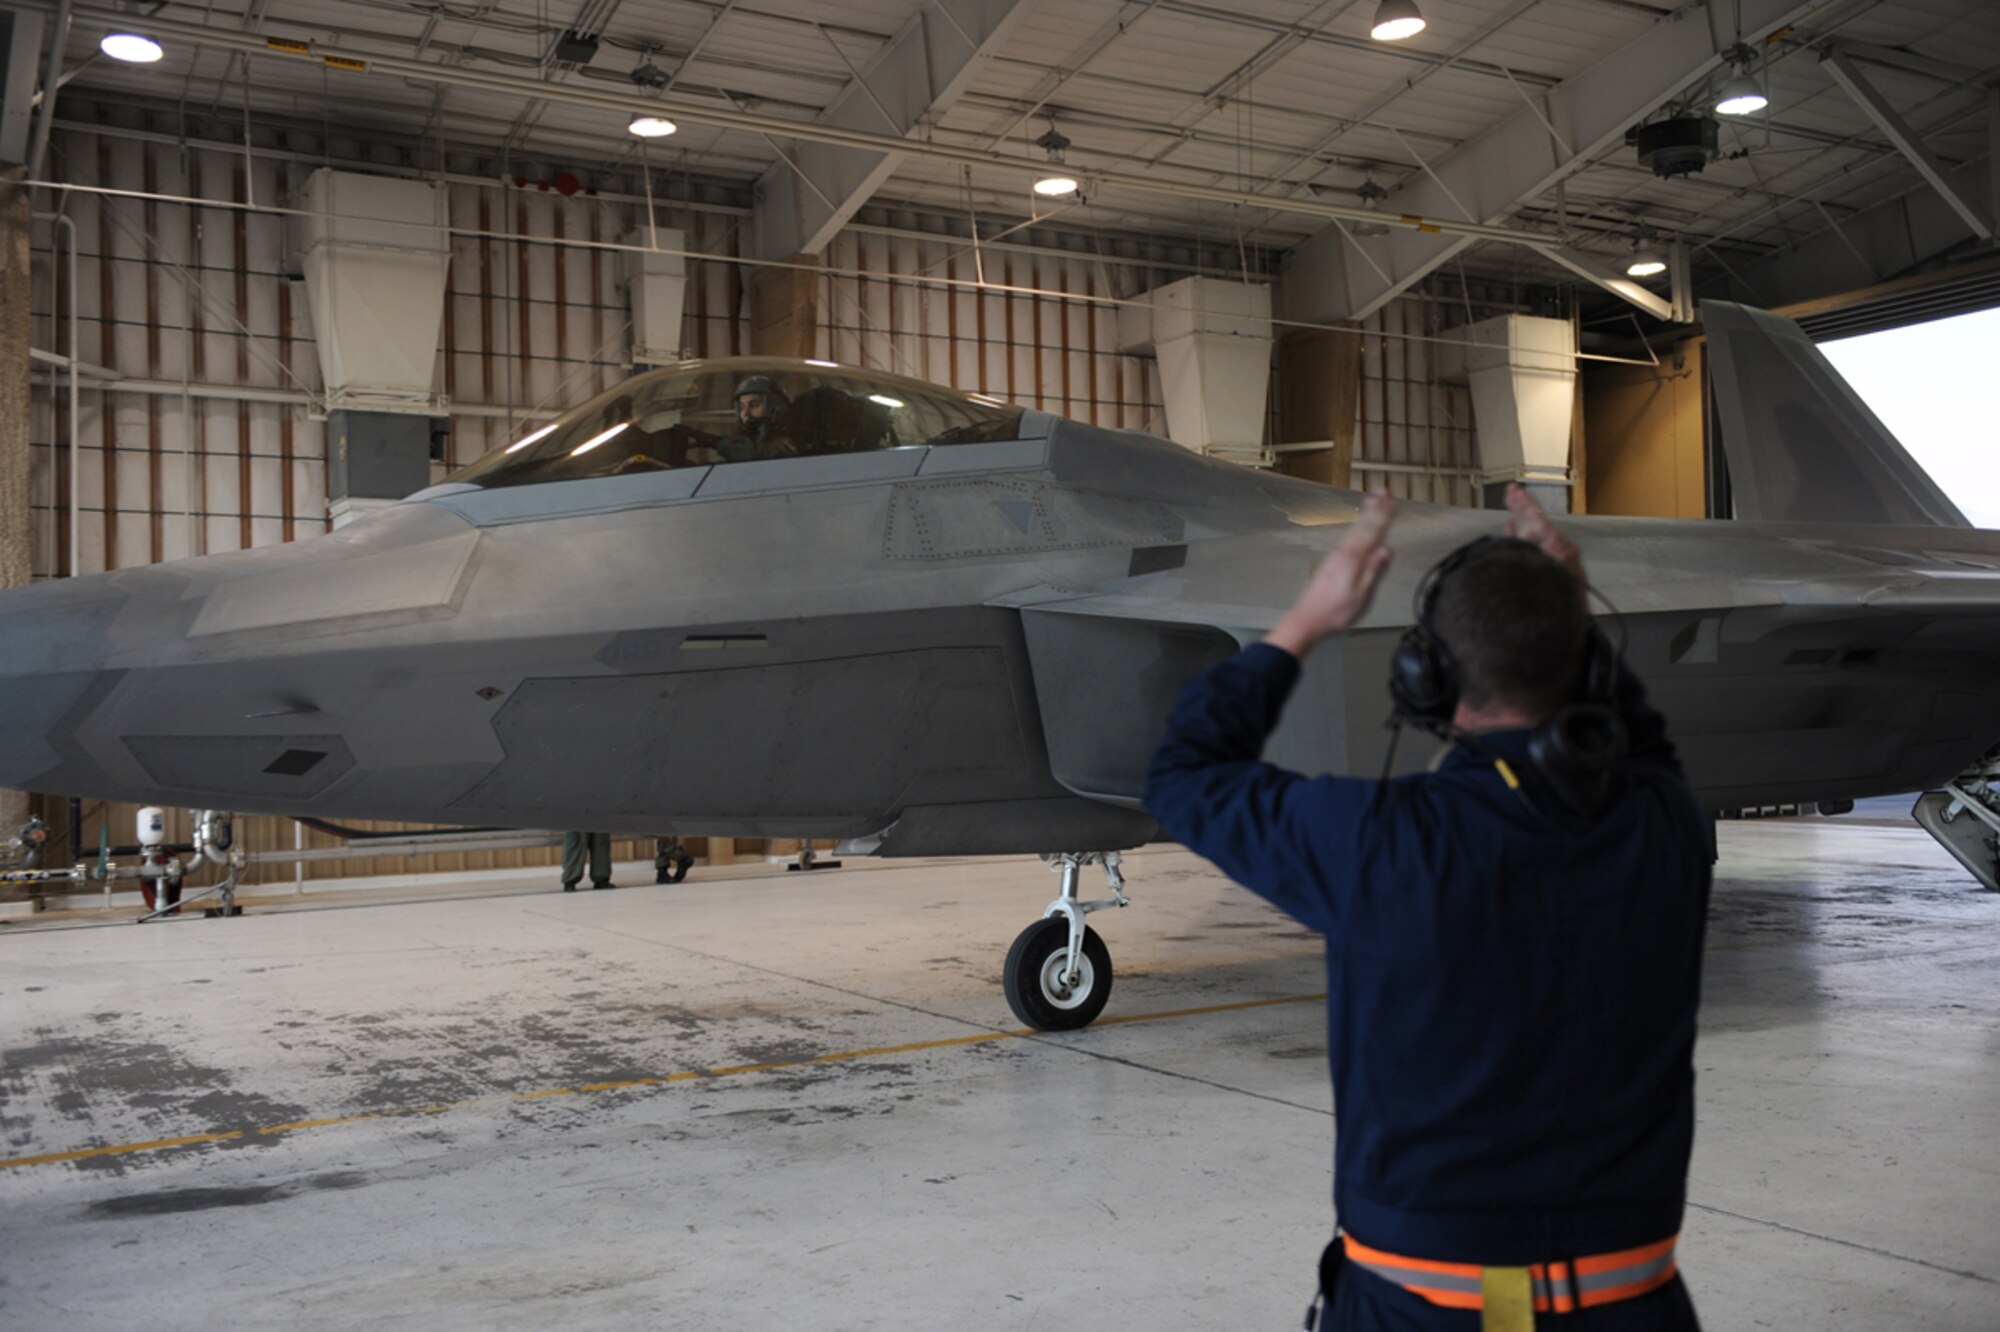 An F-22 Arrives in hanger at Holloman Air Force Base, New Mexico